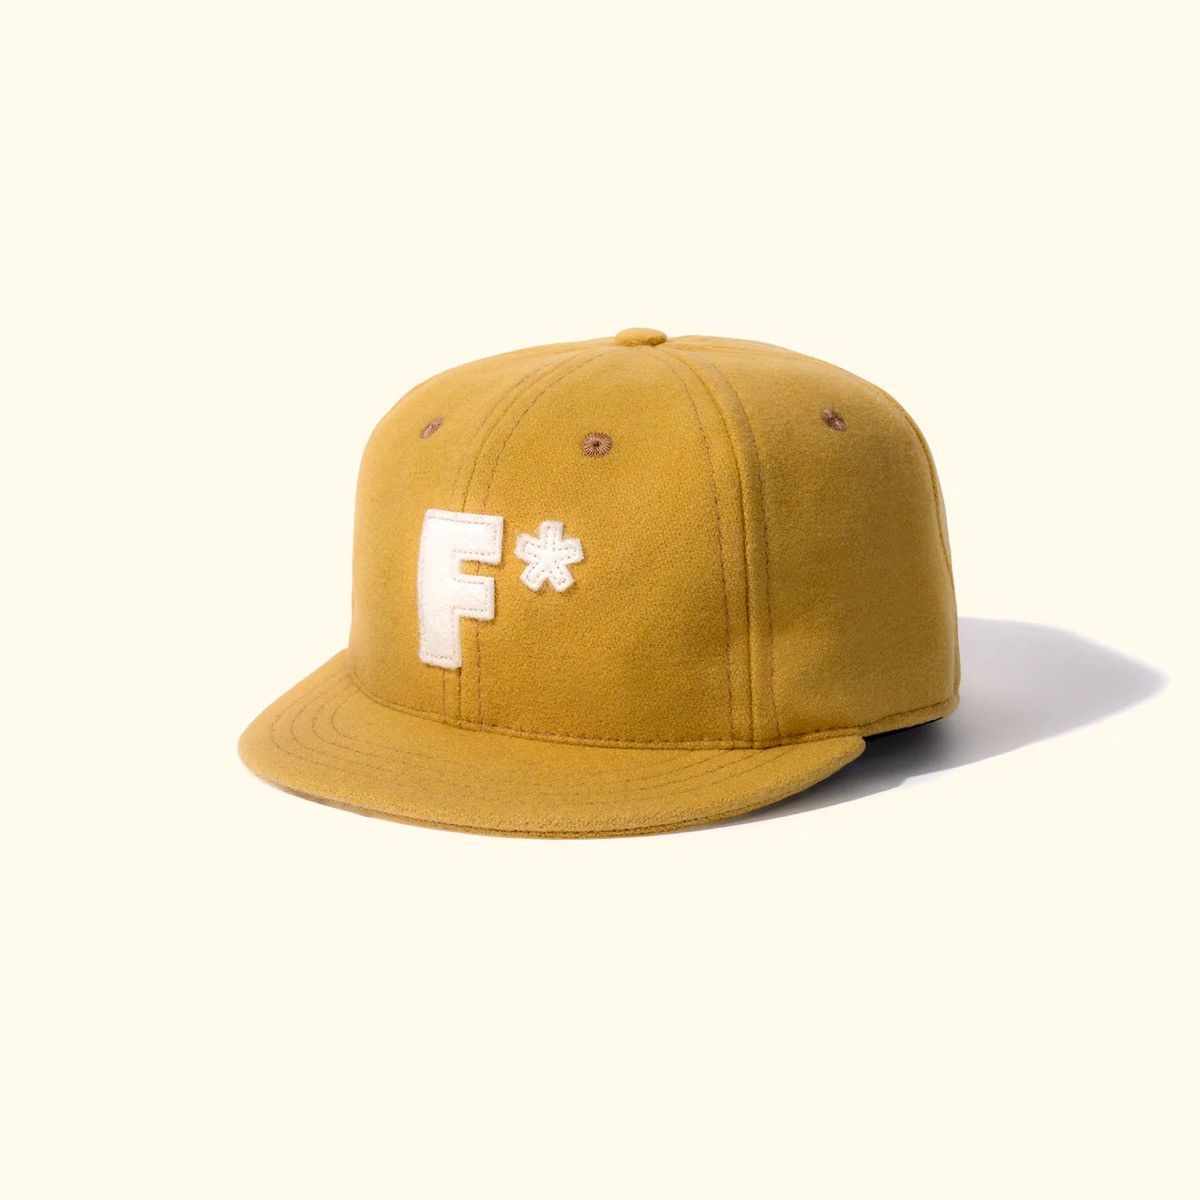 GOLF le FLEUR F* FITTED CAP YELLOWHand-sewn